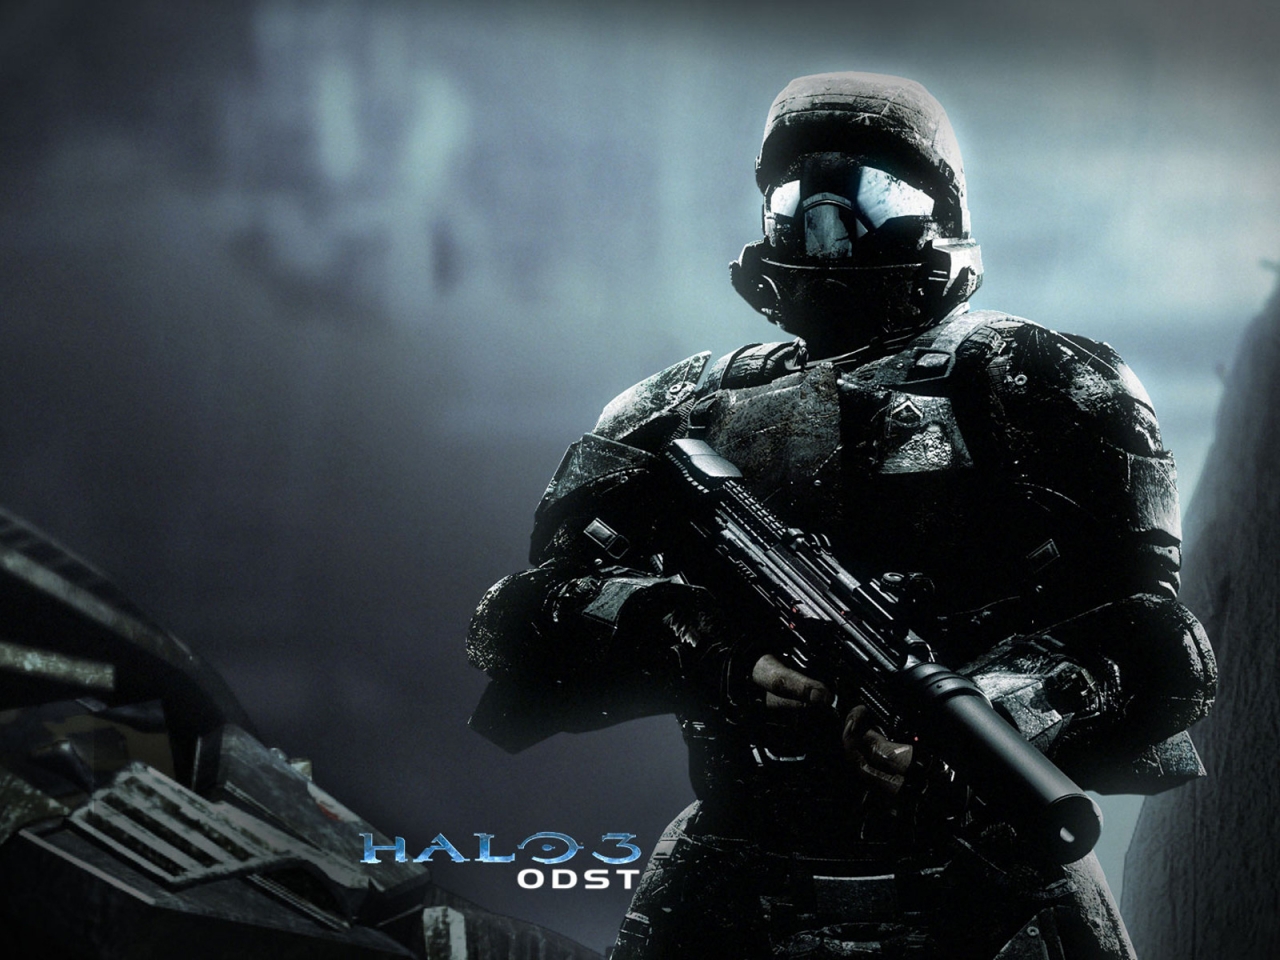 Halo 3 ODST for 1280 x 960 resolution